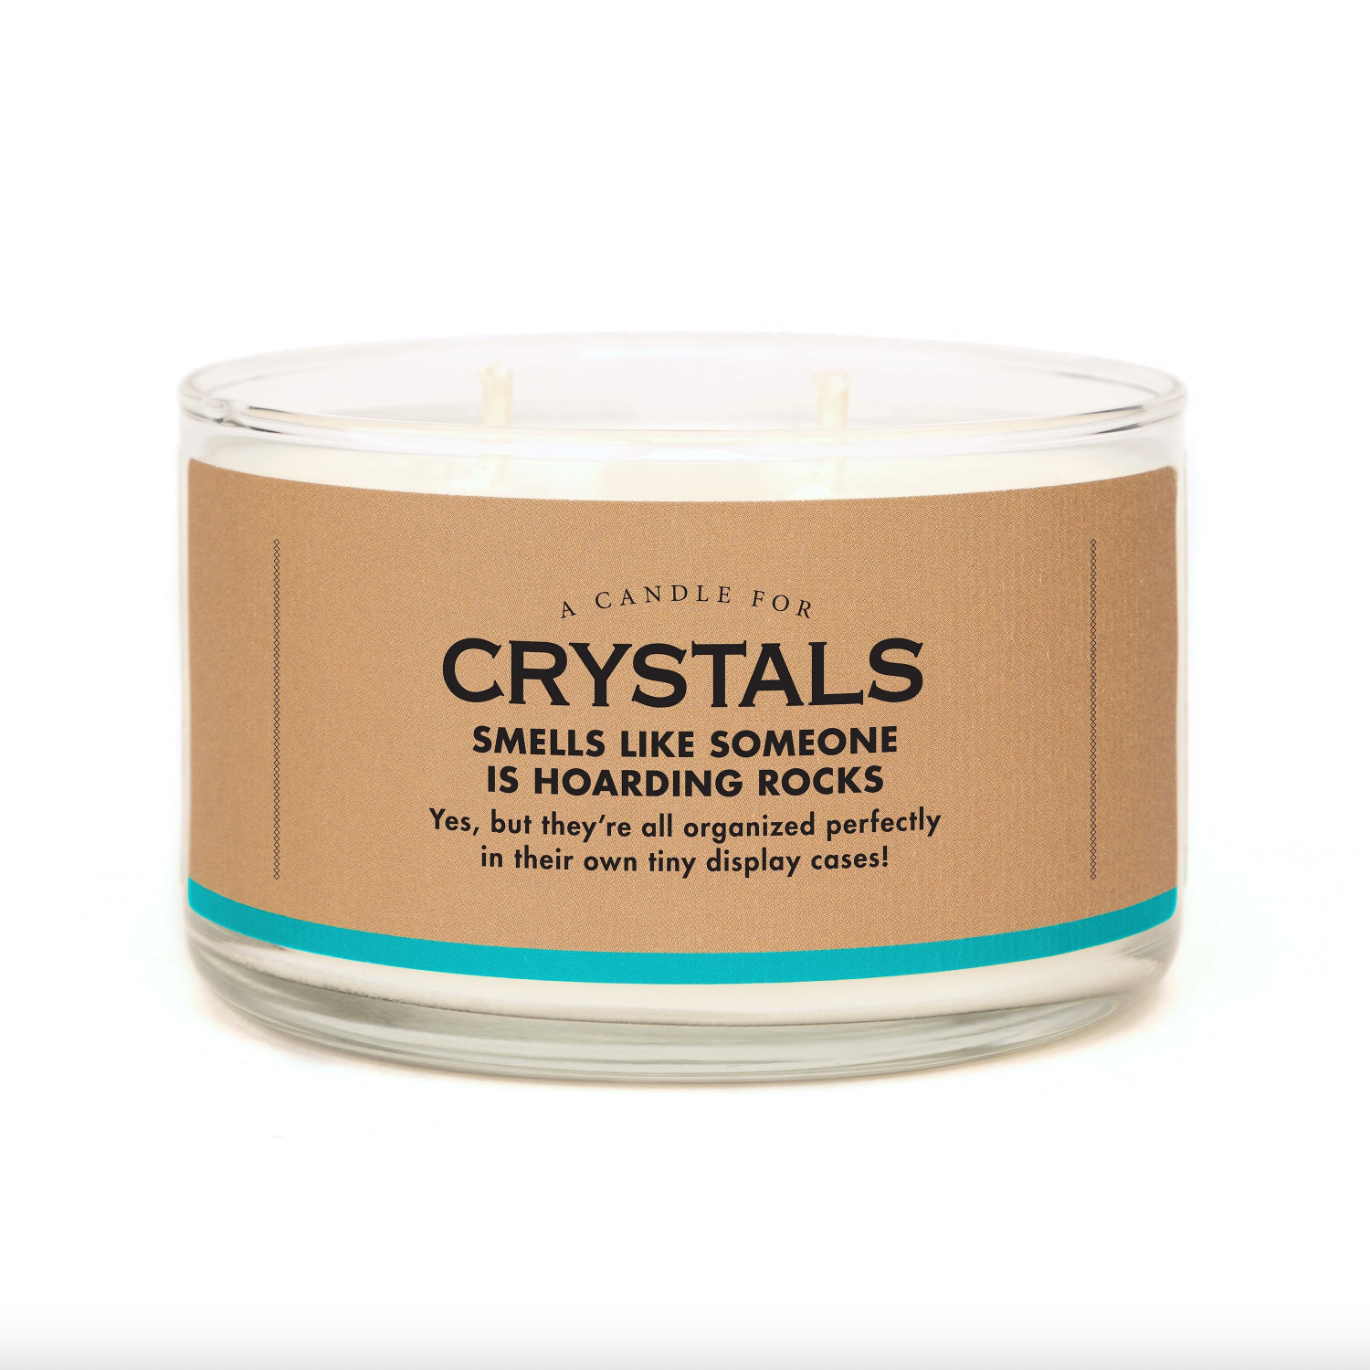 Candle for Crystals - Heart of the Home LV